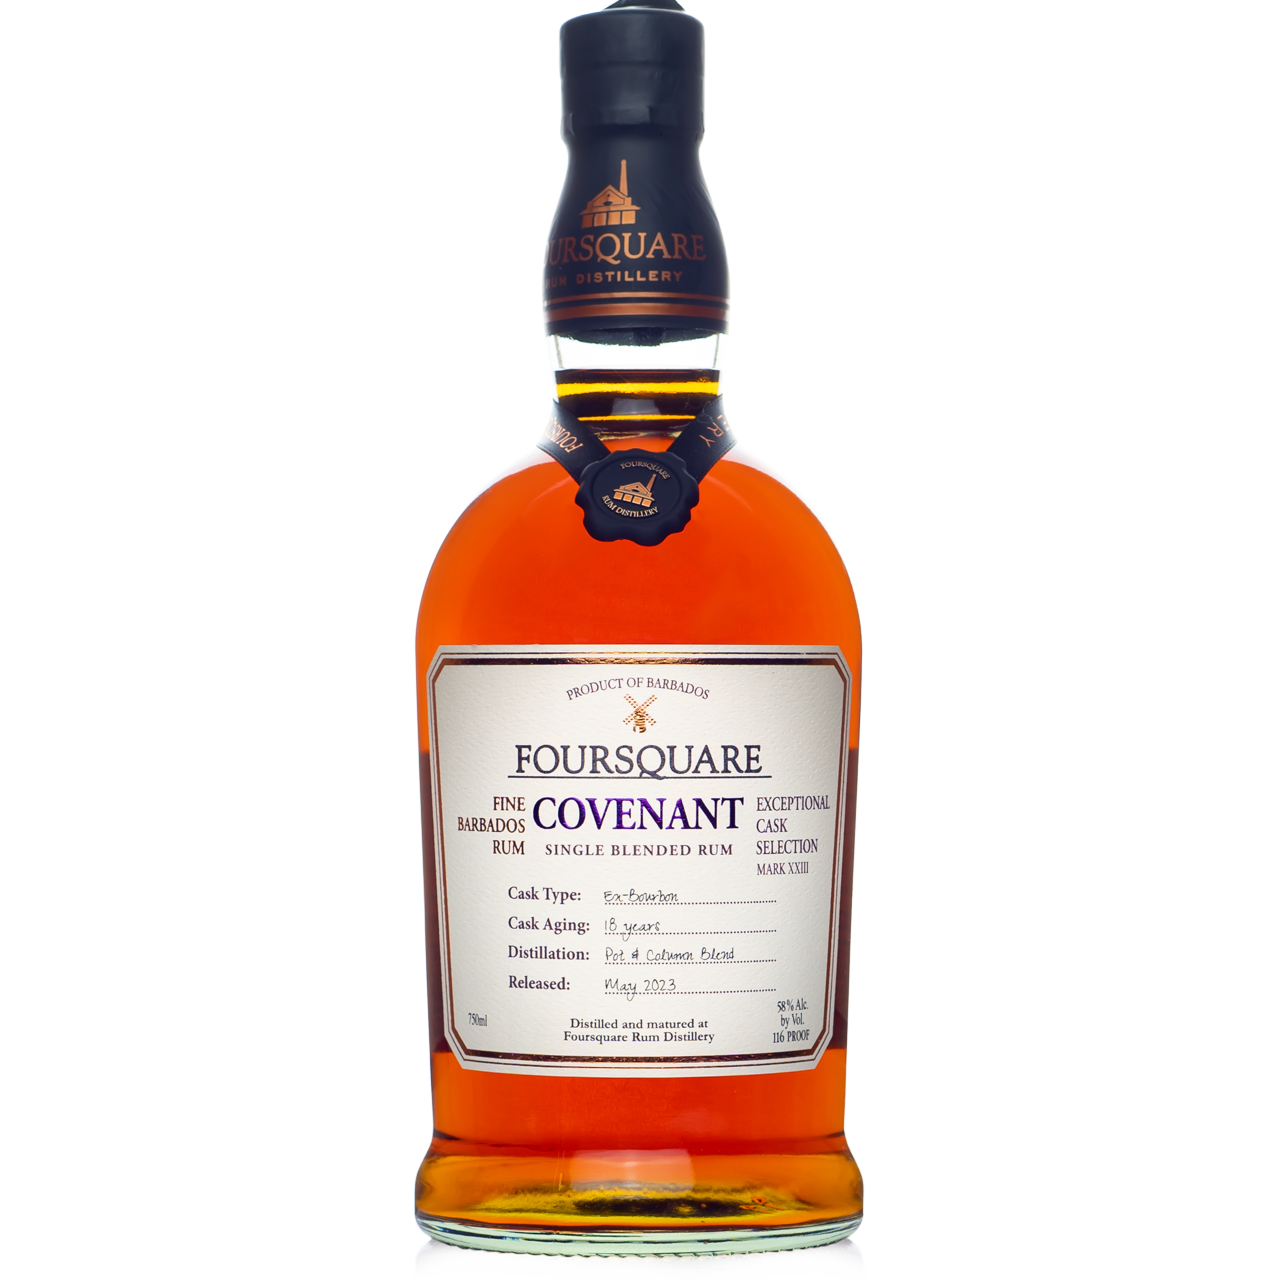 Foursquare Exceptional Cask Mark XXIII "Covenant" 18 Year Rum